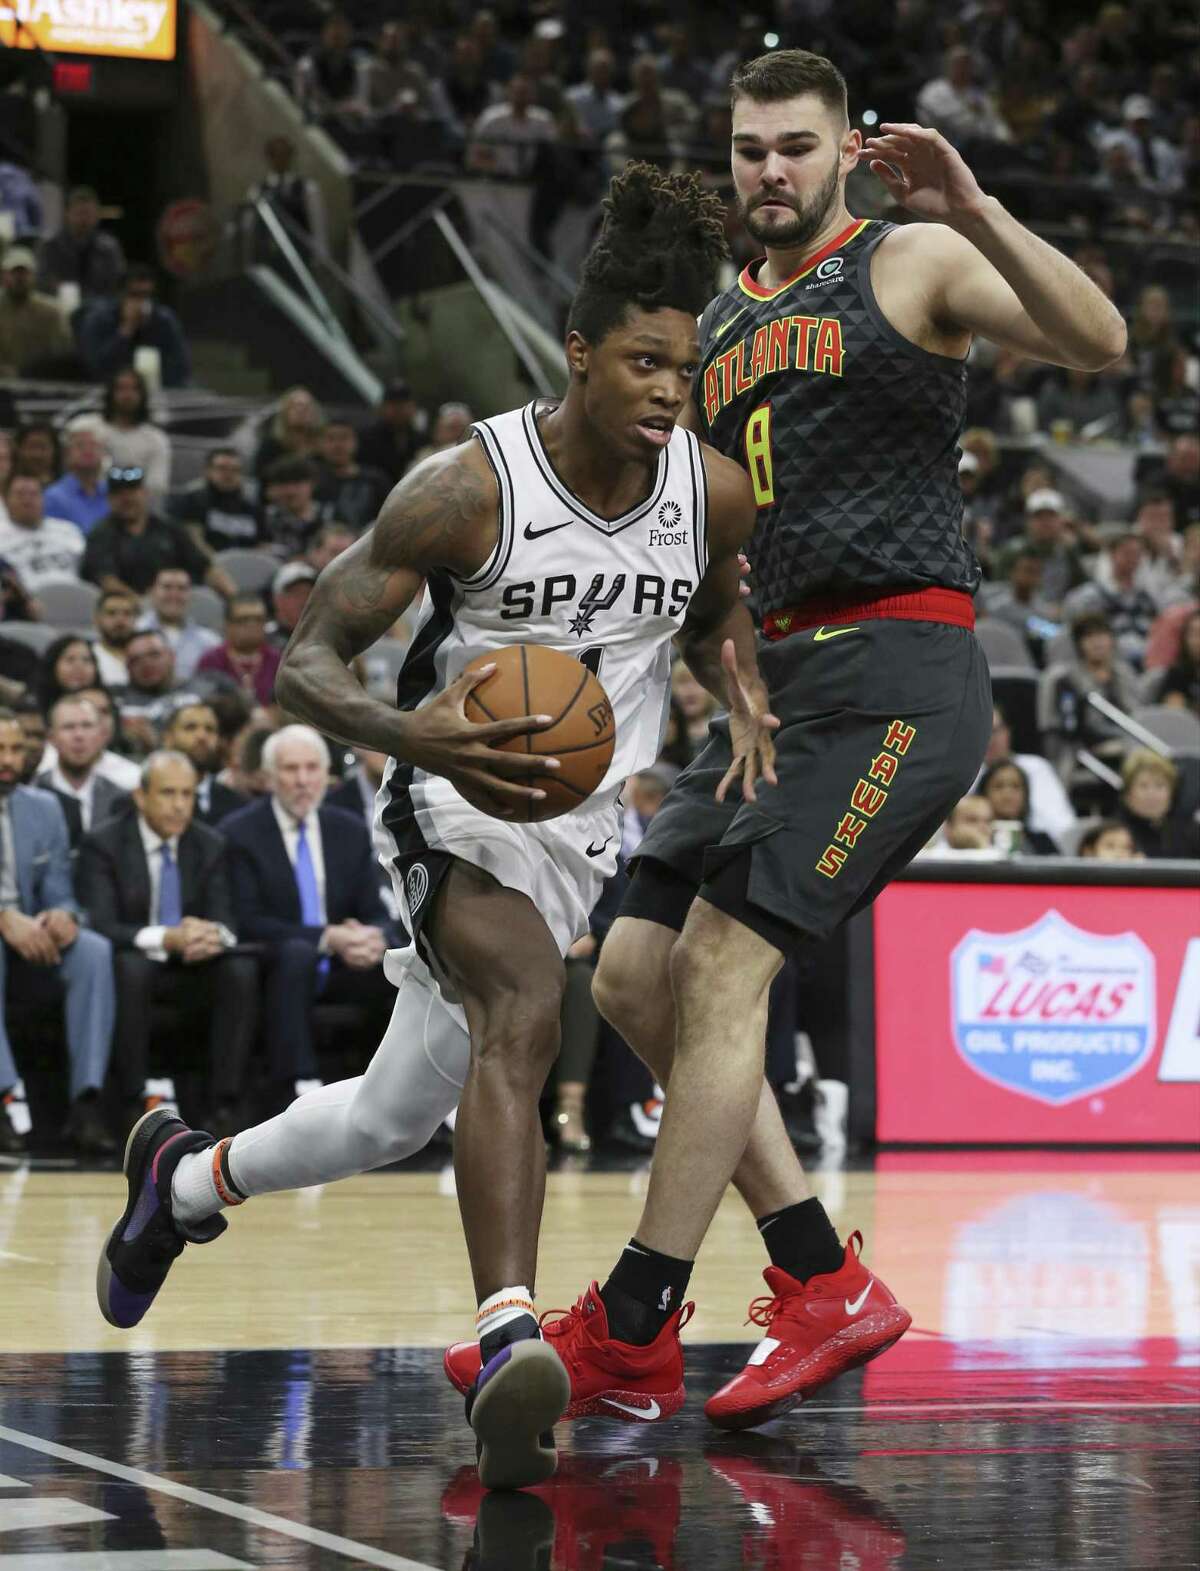 Spurs' Lonnie Walker, IV (01) drives the baseline against Atlanta Hawks' Isaac Humphries (08) during their game at the AT&T Center on Tuesday, Apr. 2, 2019. (Kin Man Hui/San Antonio Express-News)